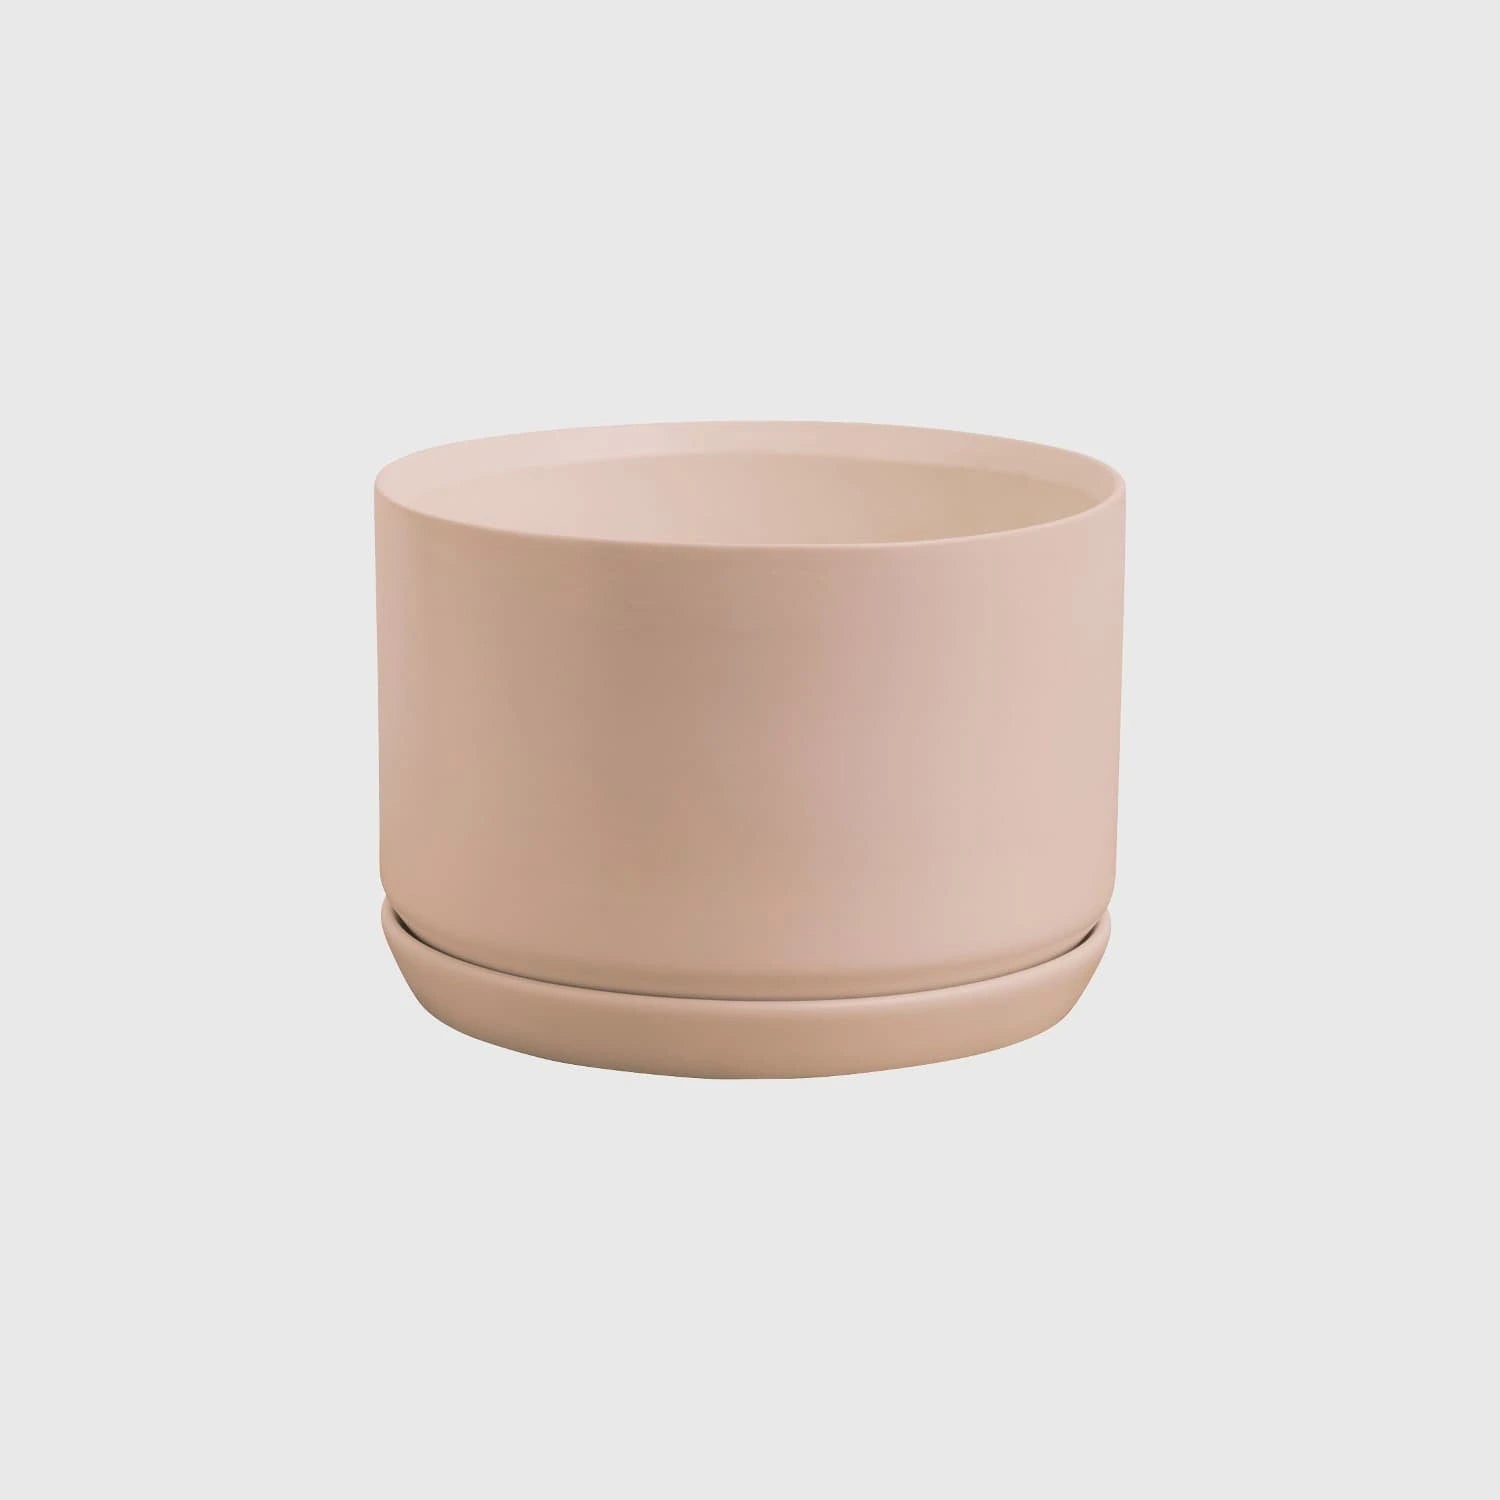 Wide Oslo Planter in Peach by Potted for Indoor Plants